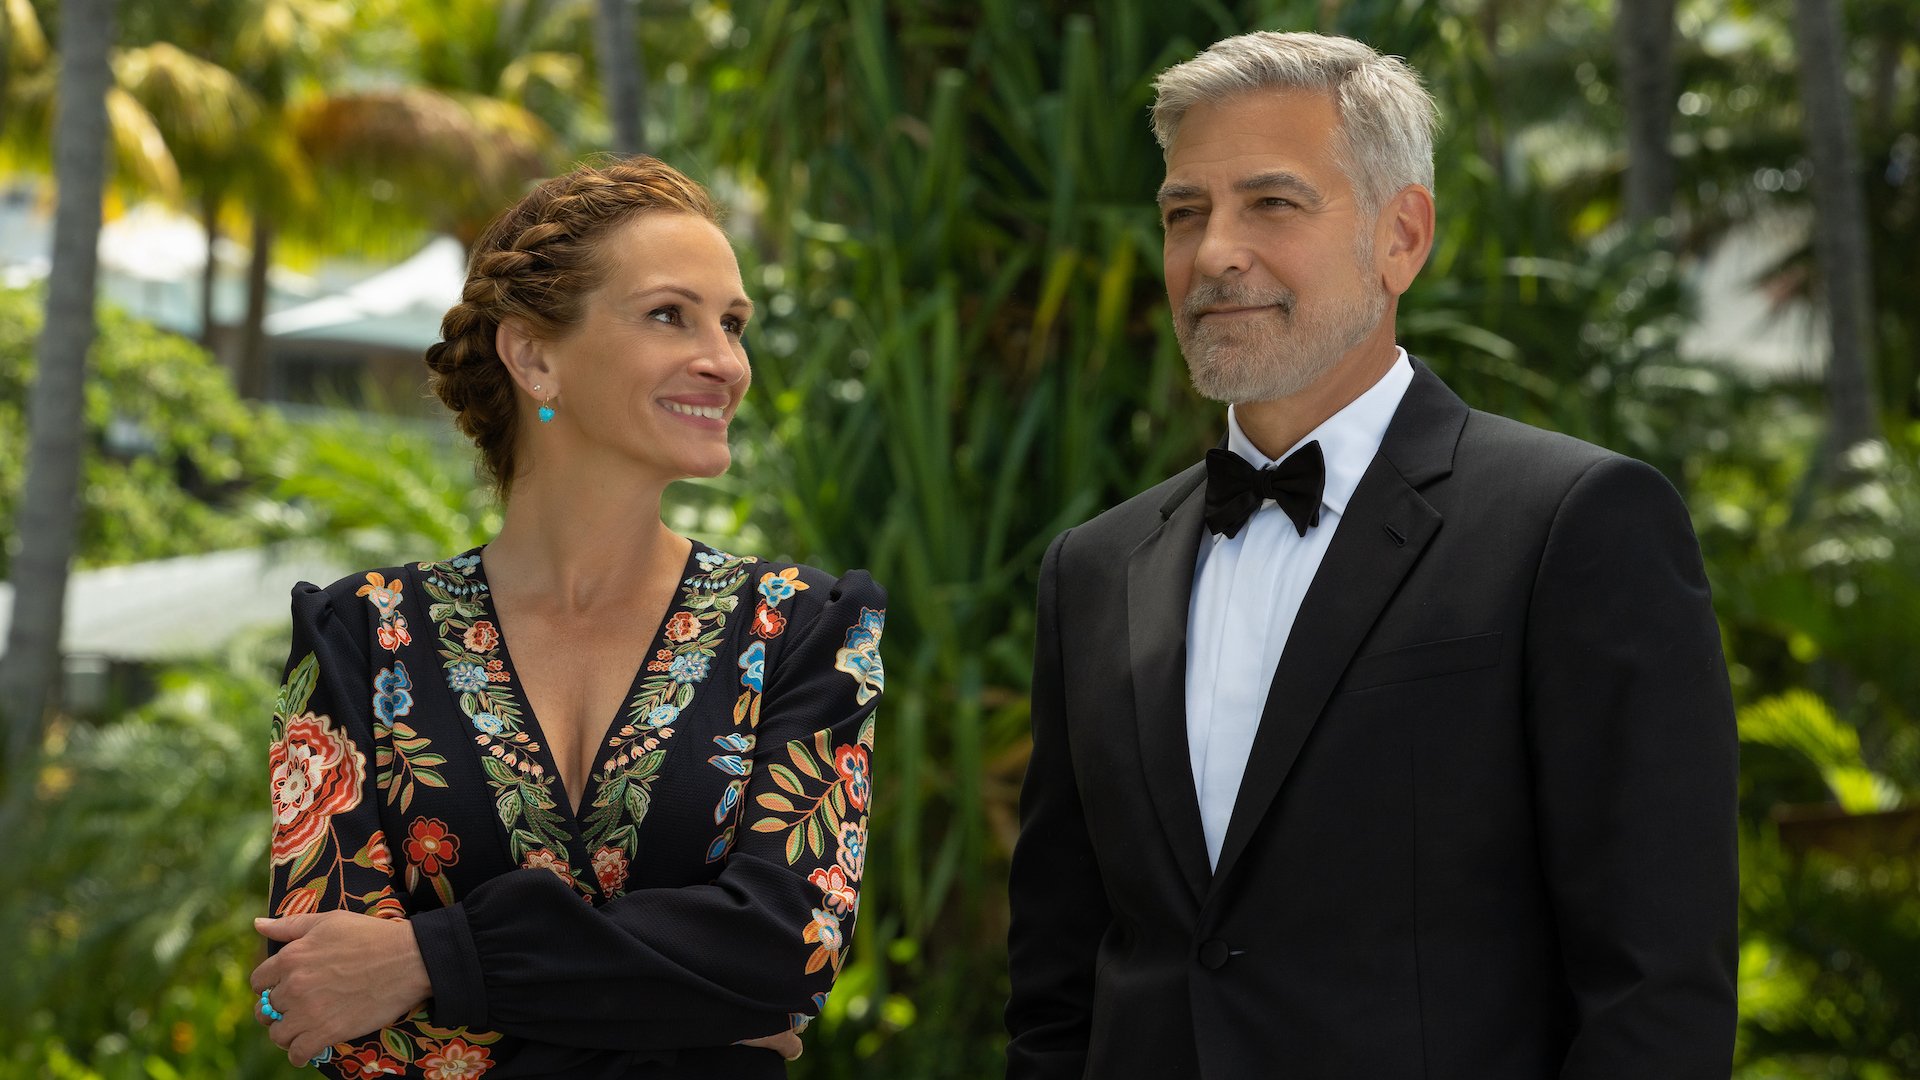 ‘Ticket to Paradise’ review: Take a trip through classic Julia Roberts and George Clooney rom-com banter